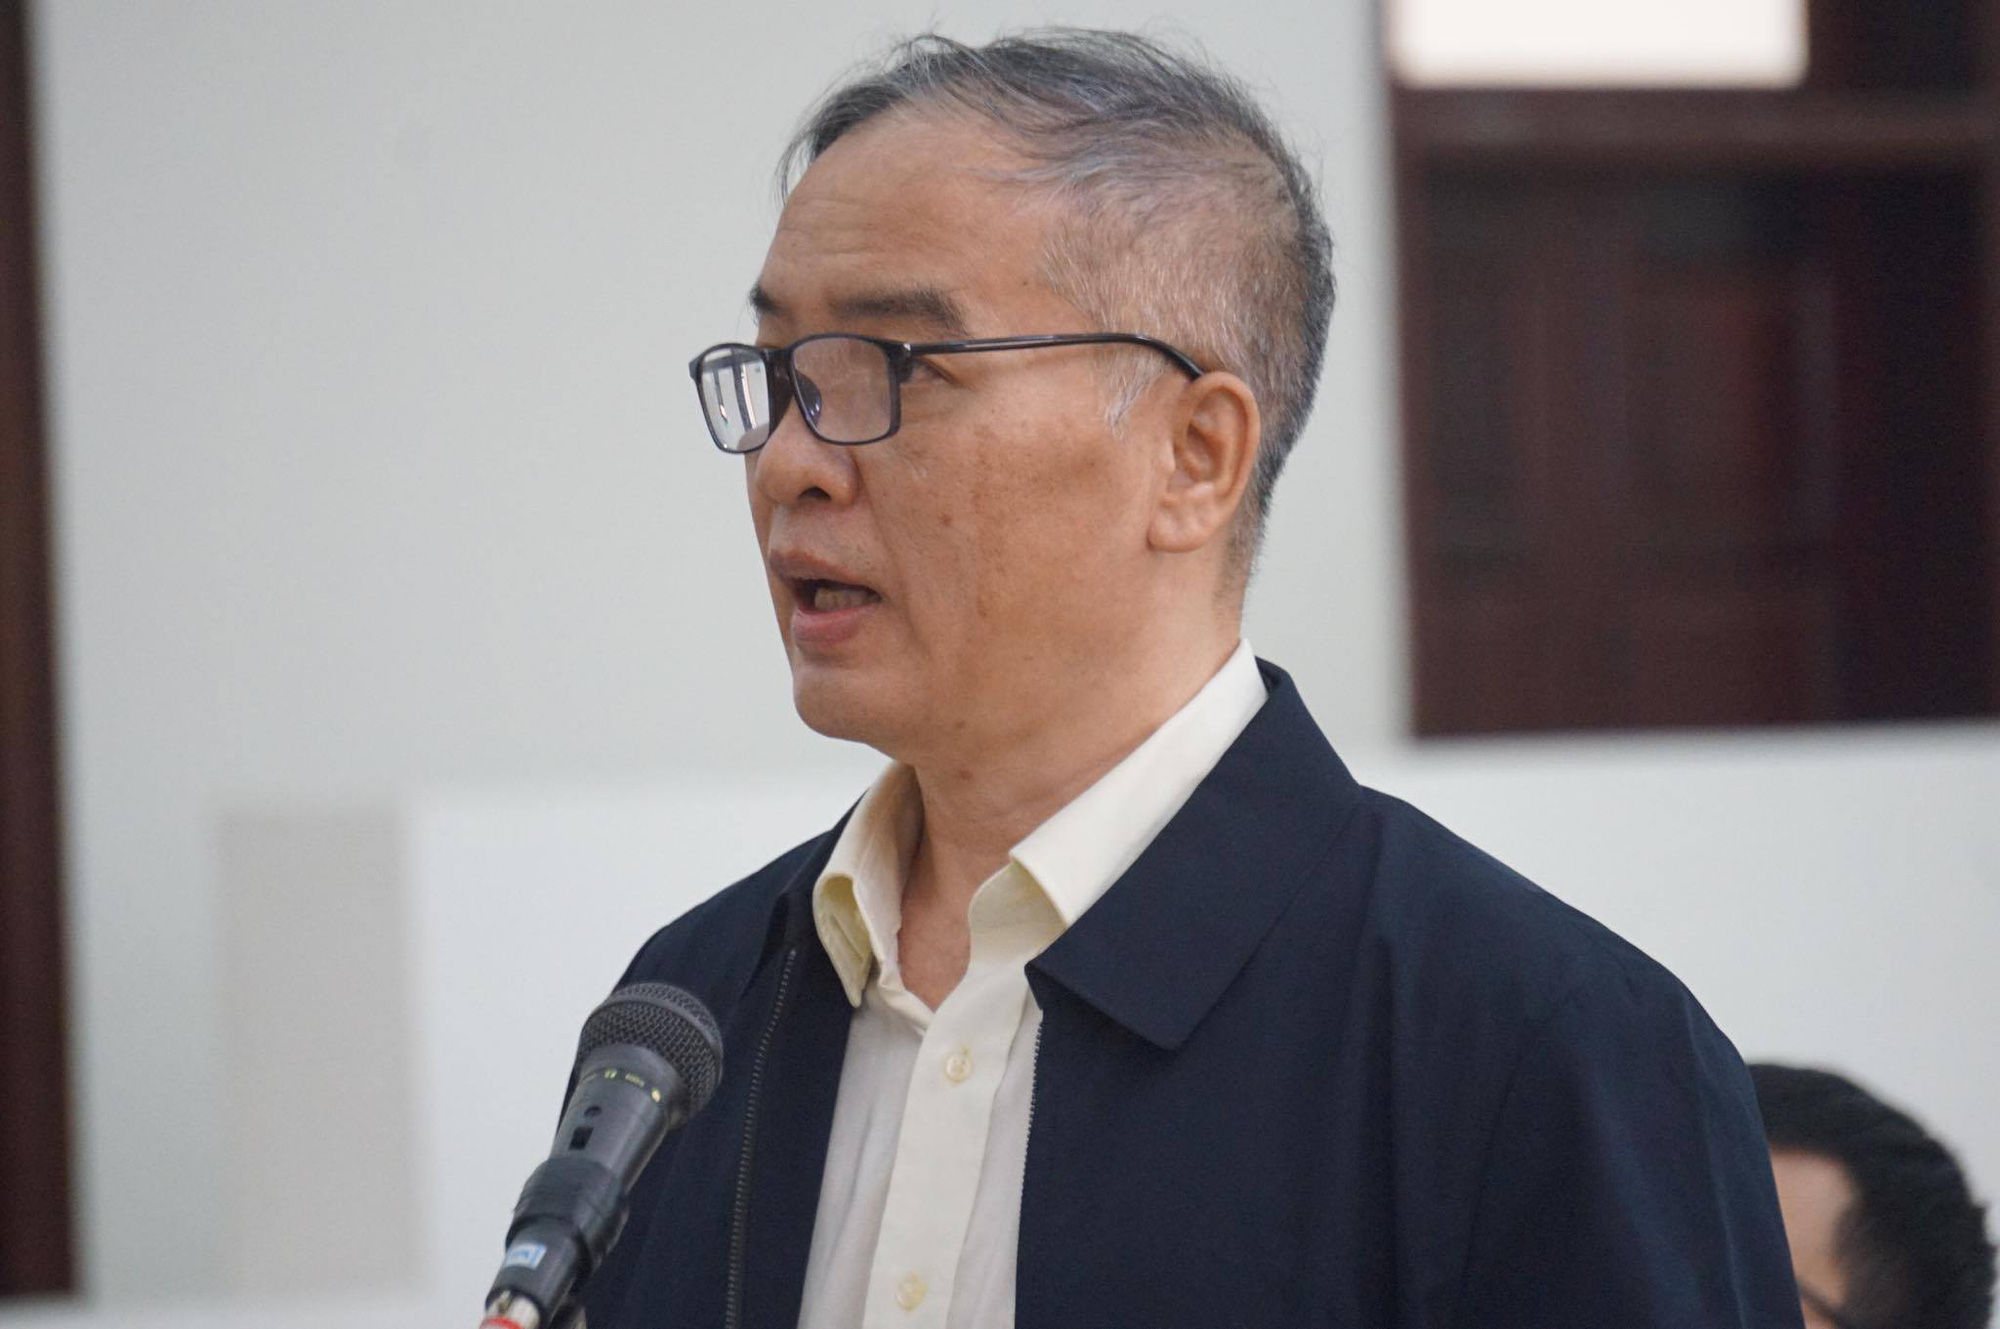 Le Nam Tra, former chairman of MobiFone, appears at an appellate court in Hanoi, Vietnam, April 27, 2020. Photo: Than Hoang / Tuoi Tre